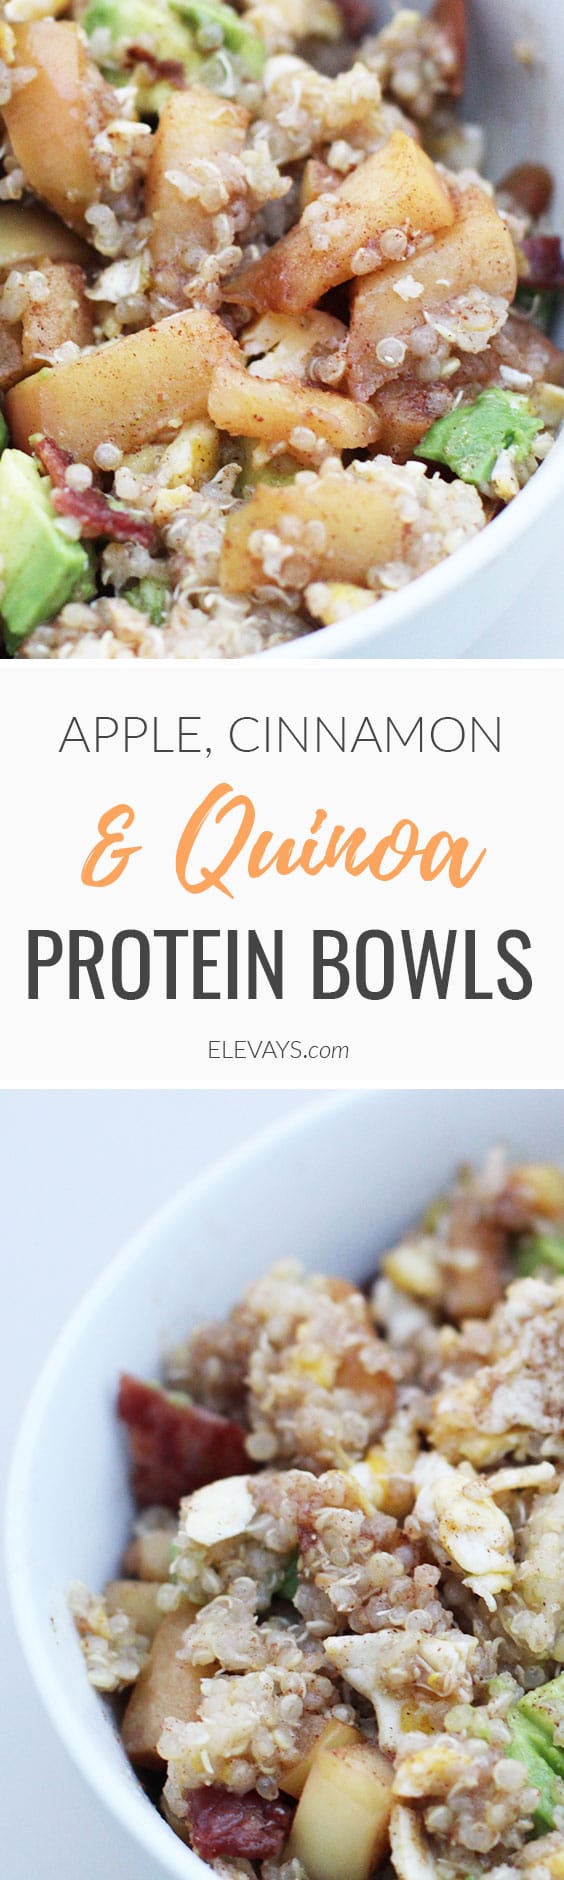 Bring on the protein! If you want a breakfast recipe that will keep you satisfied for hours as you start your day, this is apple and quinoa protein bowl is the one to try. #quinoa #protein